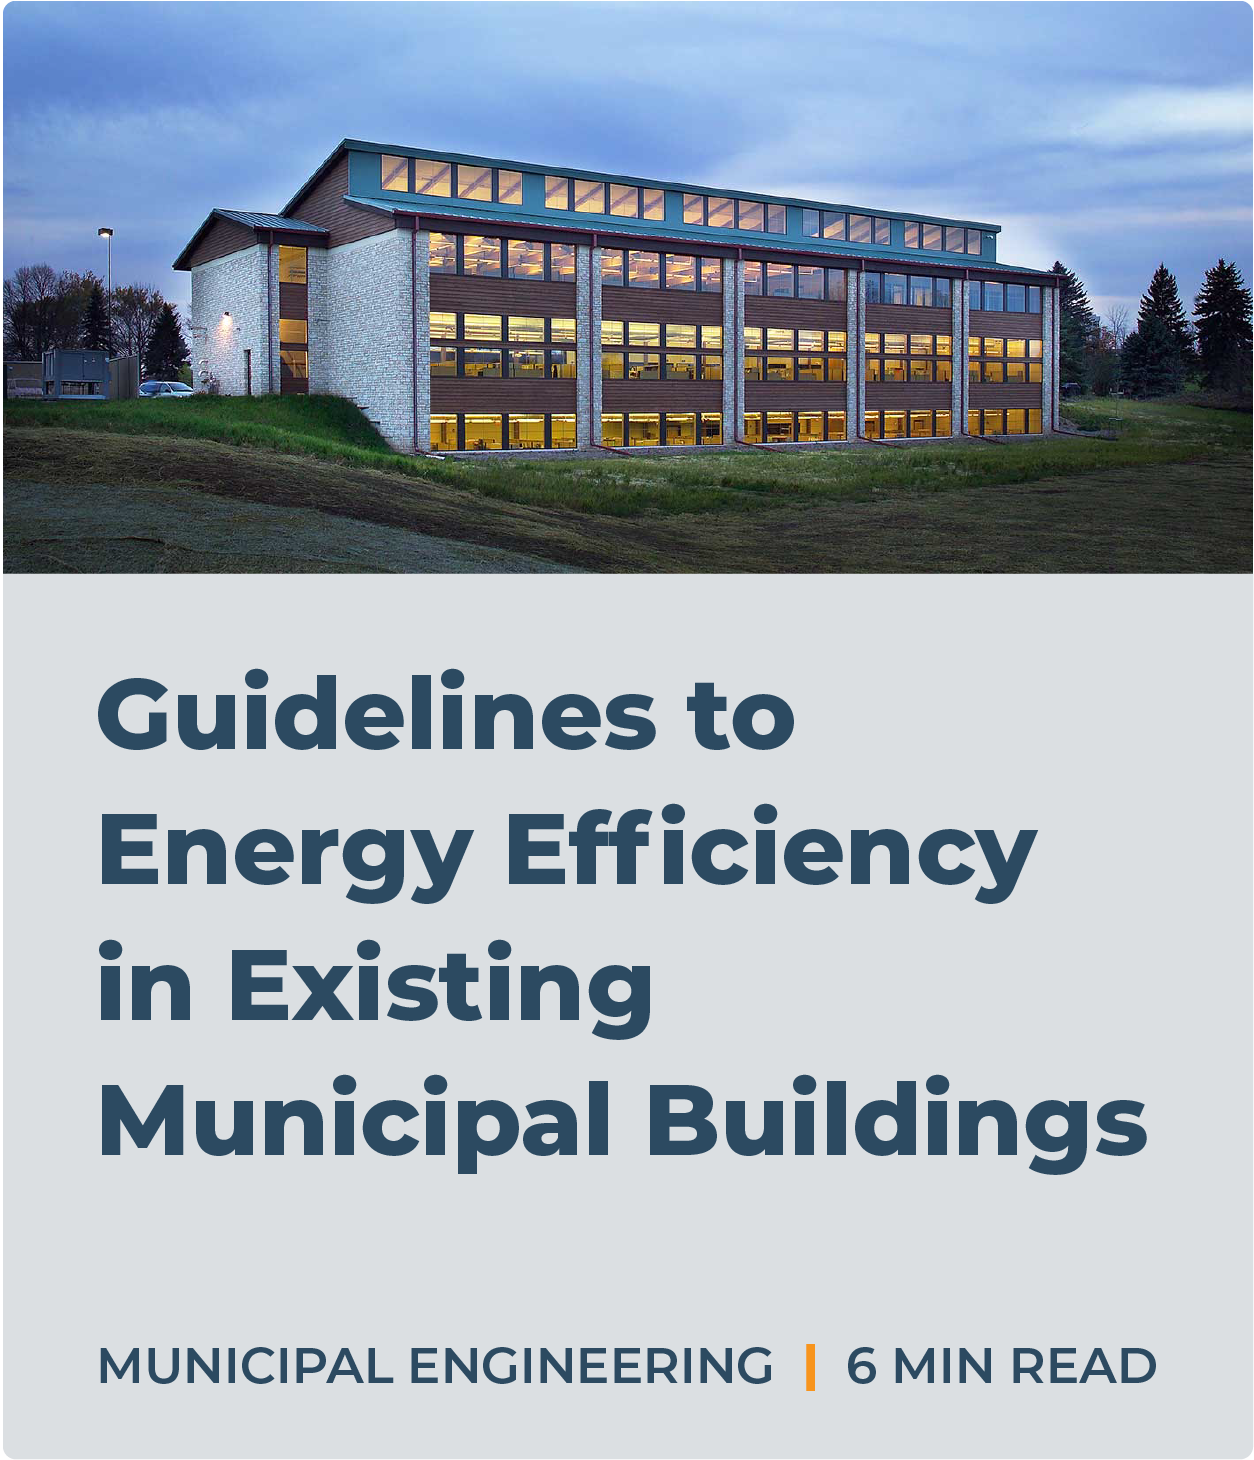 Guidelines to Energy Efficiency in Existing Municipal Buildings